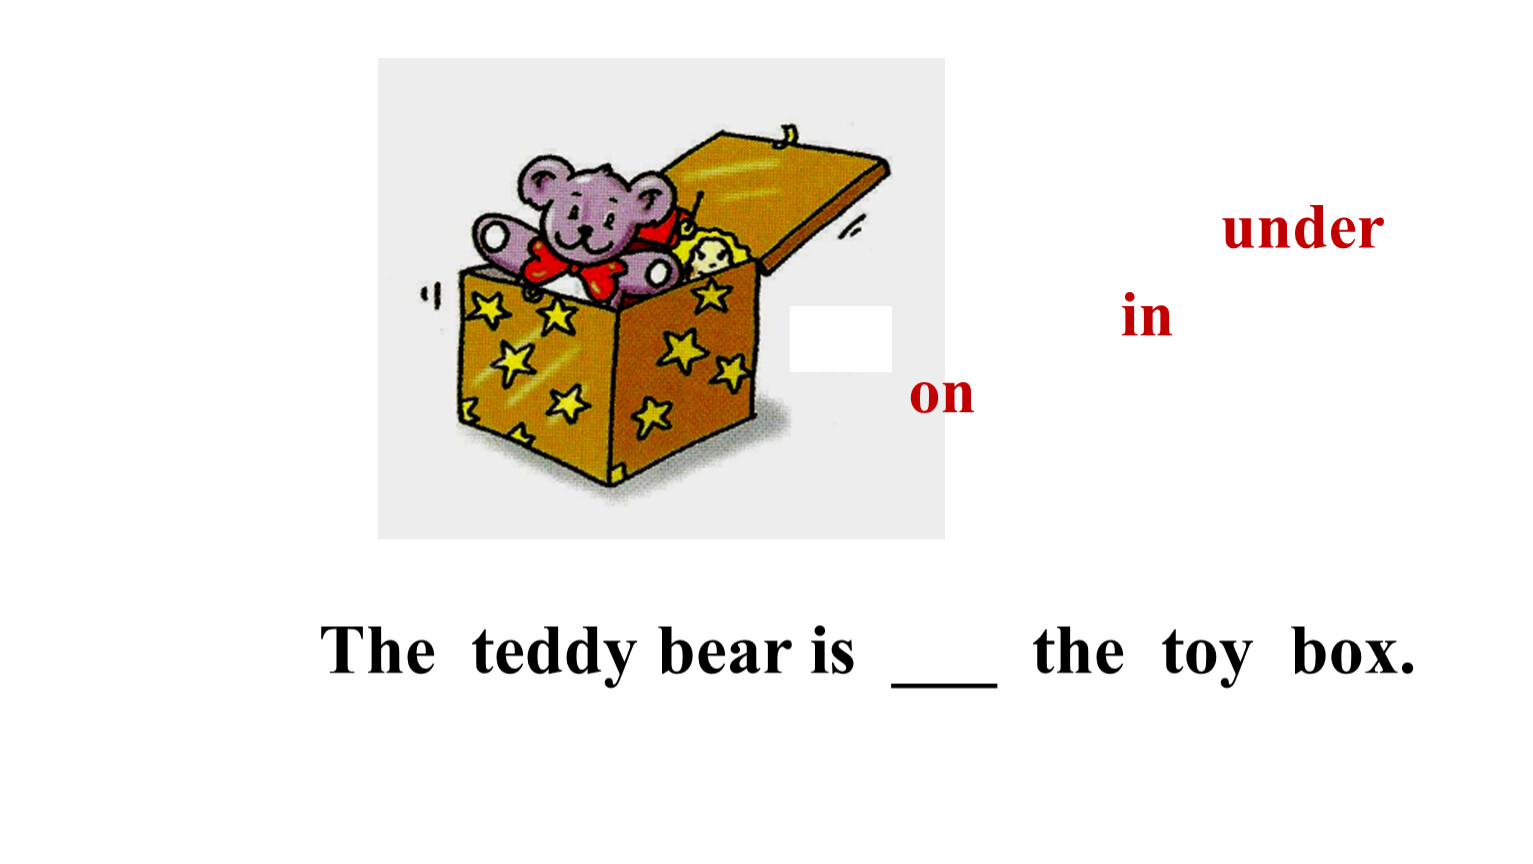 Where is the teddy bear. Предлоги in on under. Предлоги on in under для детей. Предлоги on in under 2 класс. Спотлайт предлоги in on under 2.